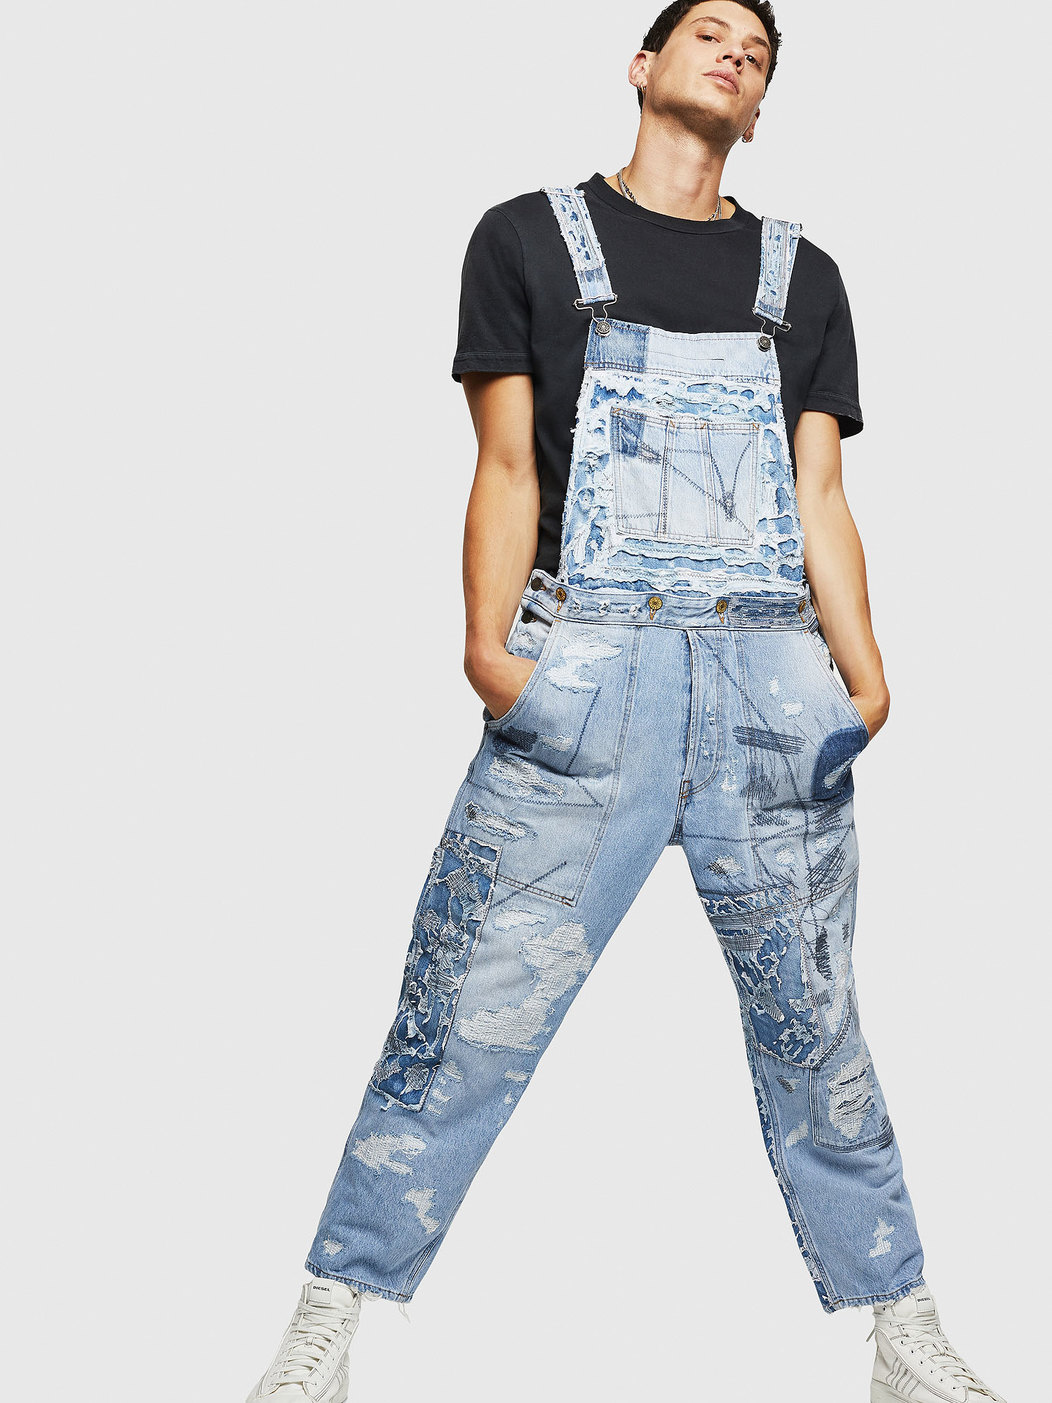 Dungaree - Shop Dungaree for Women Online in South Africa